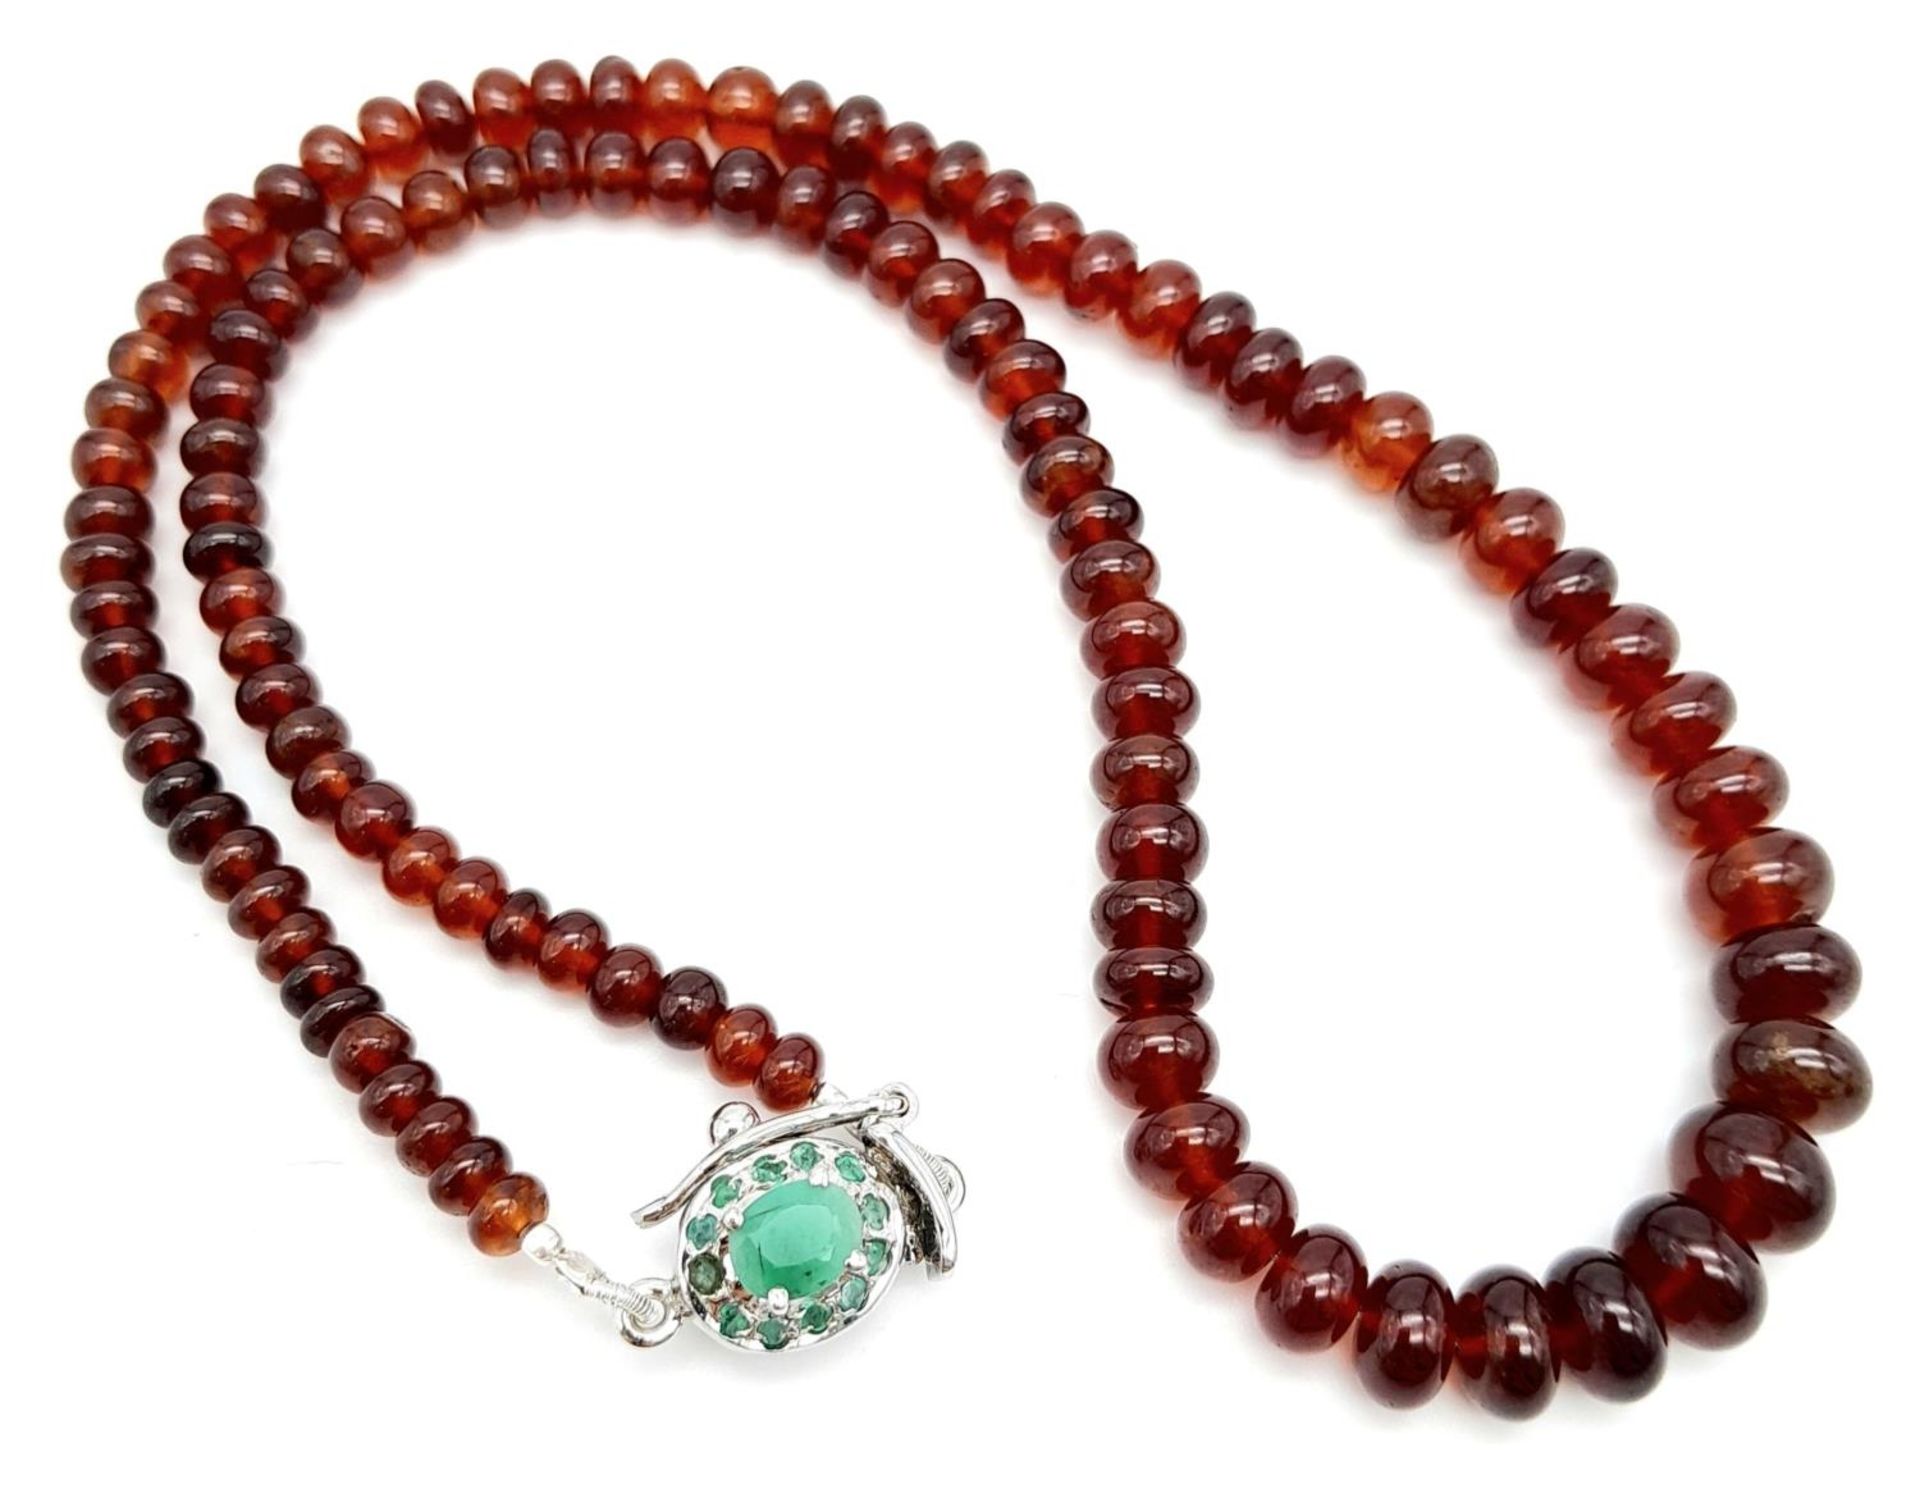 A 210ctw Hessonite Garnet Graduated Rondelle Necklace - with Emerald and 925 Silver clasp. 42cm. - Image 3 of 5